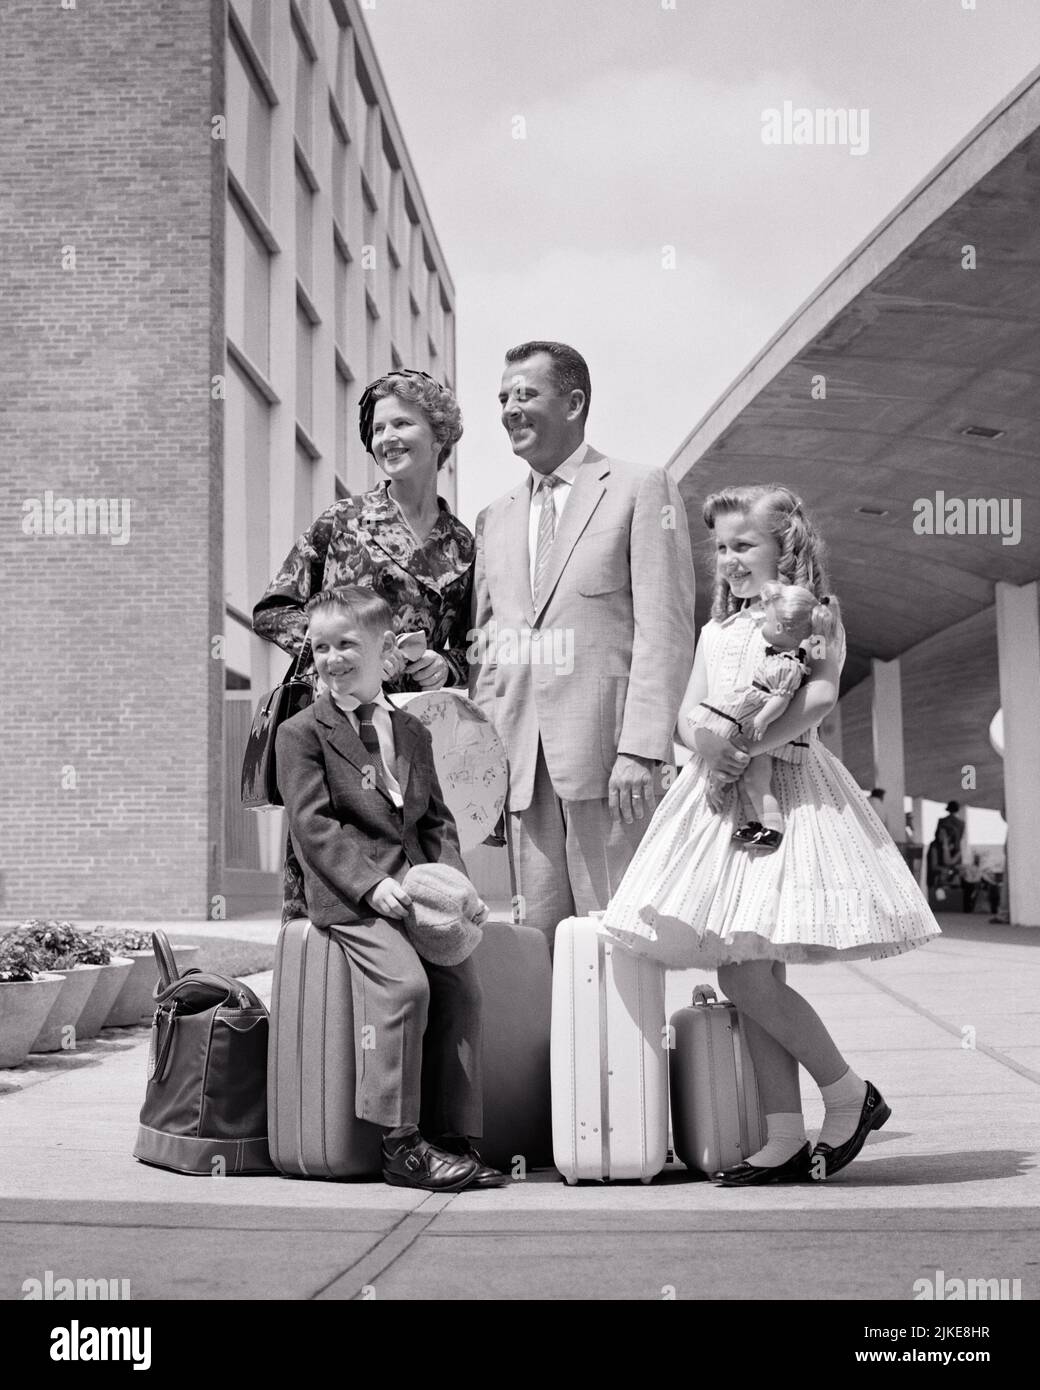 1950s FAMILY OF FOUR ON VACATION TRIP ARRIVED DRESSED FOR TRAVEL CARRYING LUGGAGE MOTHER FATHER WITH TWO KIDS WAITING FOR TAXI  - j9105 HAR001 HARS TRAVEL MOM LUGGAGE NOSTALGIC PAIR 4 BEAUTY URBAN MOTHERS OLD TIME BUSY NOSTALGIA BROTHER OLD FASHION SISTER 1 JUVENILE SECURITY BALANCE TEAMWORK VACATION STRONG TAXI SUITCASES SONS FAMILIES JOY LIFESTYLE CELEBRATION FEMALES MARRIED BROTHERS SPOUSE HUSBANDS LUXURY COPY SPACE FULL-LENGTH LADIES DAUGHTERS PERSONS CARING MALES ENTERTAINMENT SIBLINGS CONFIDENCE SISTERS TRANSPORTATION FATHERS B&W PARTNER TIME OFF SUIT AND TIE HAPPINESS ADVENTURE LEISURE Stock Photo